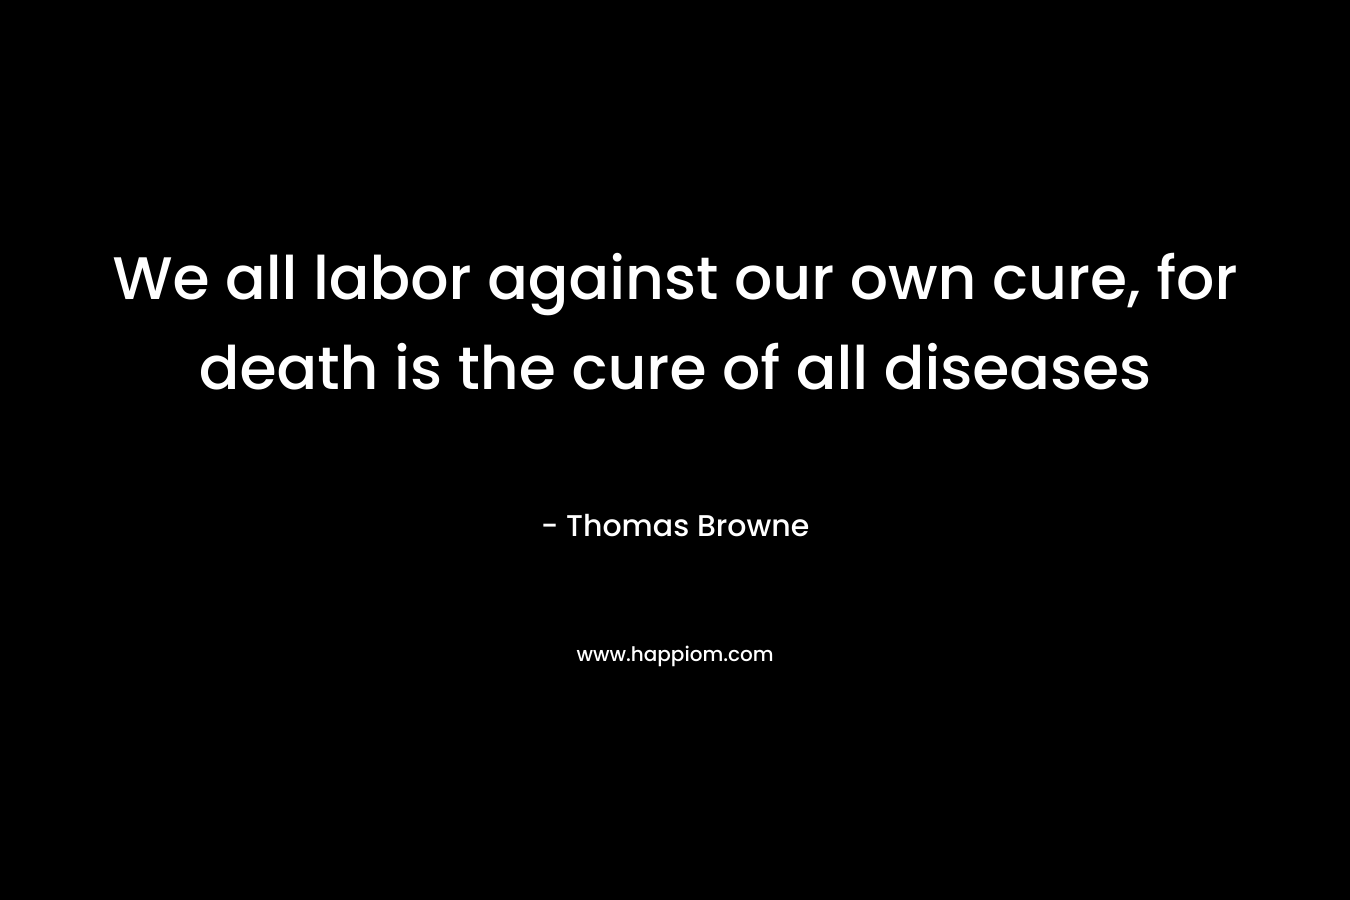 We all labor against our own cure, for death is the cure of all diseases – Thomas Browne